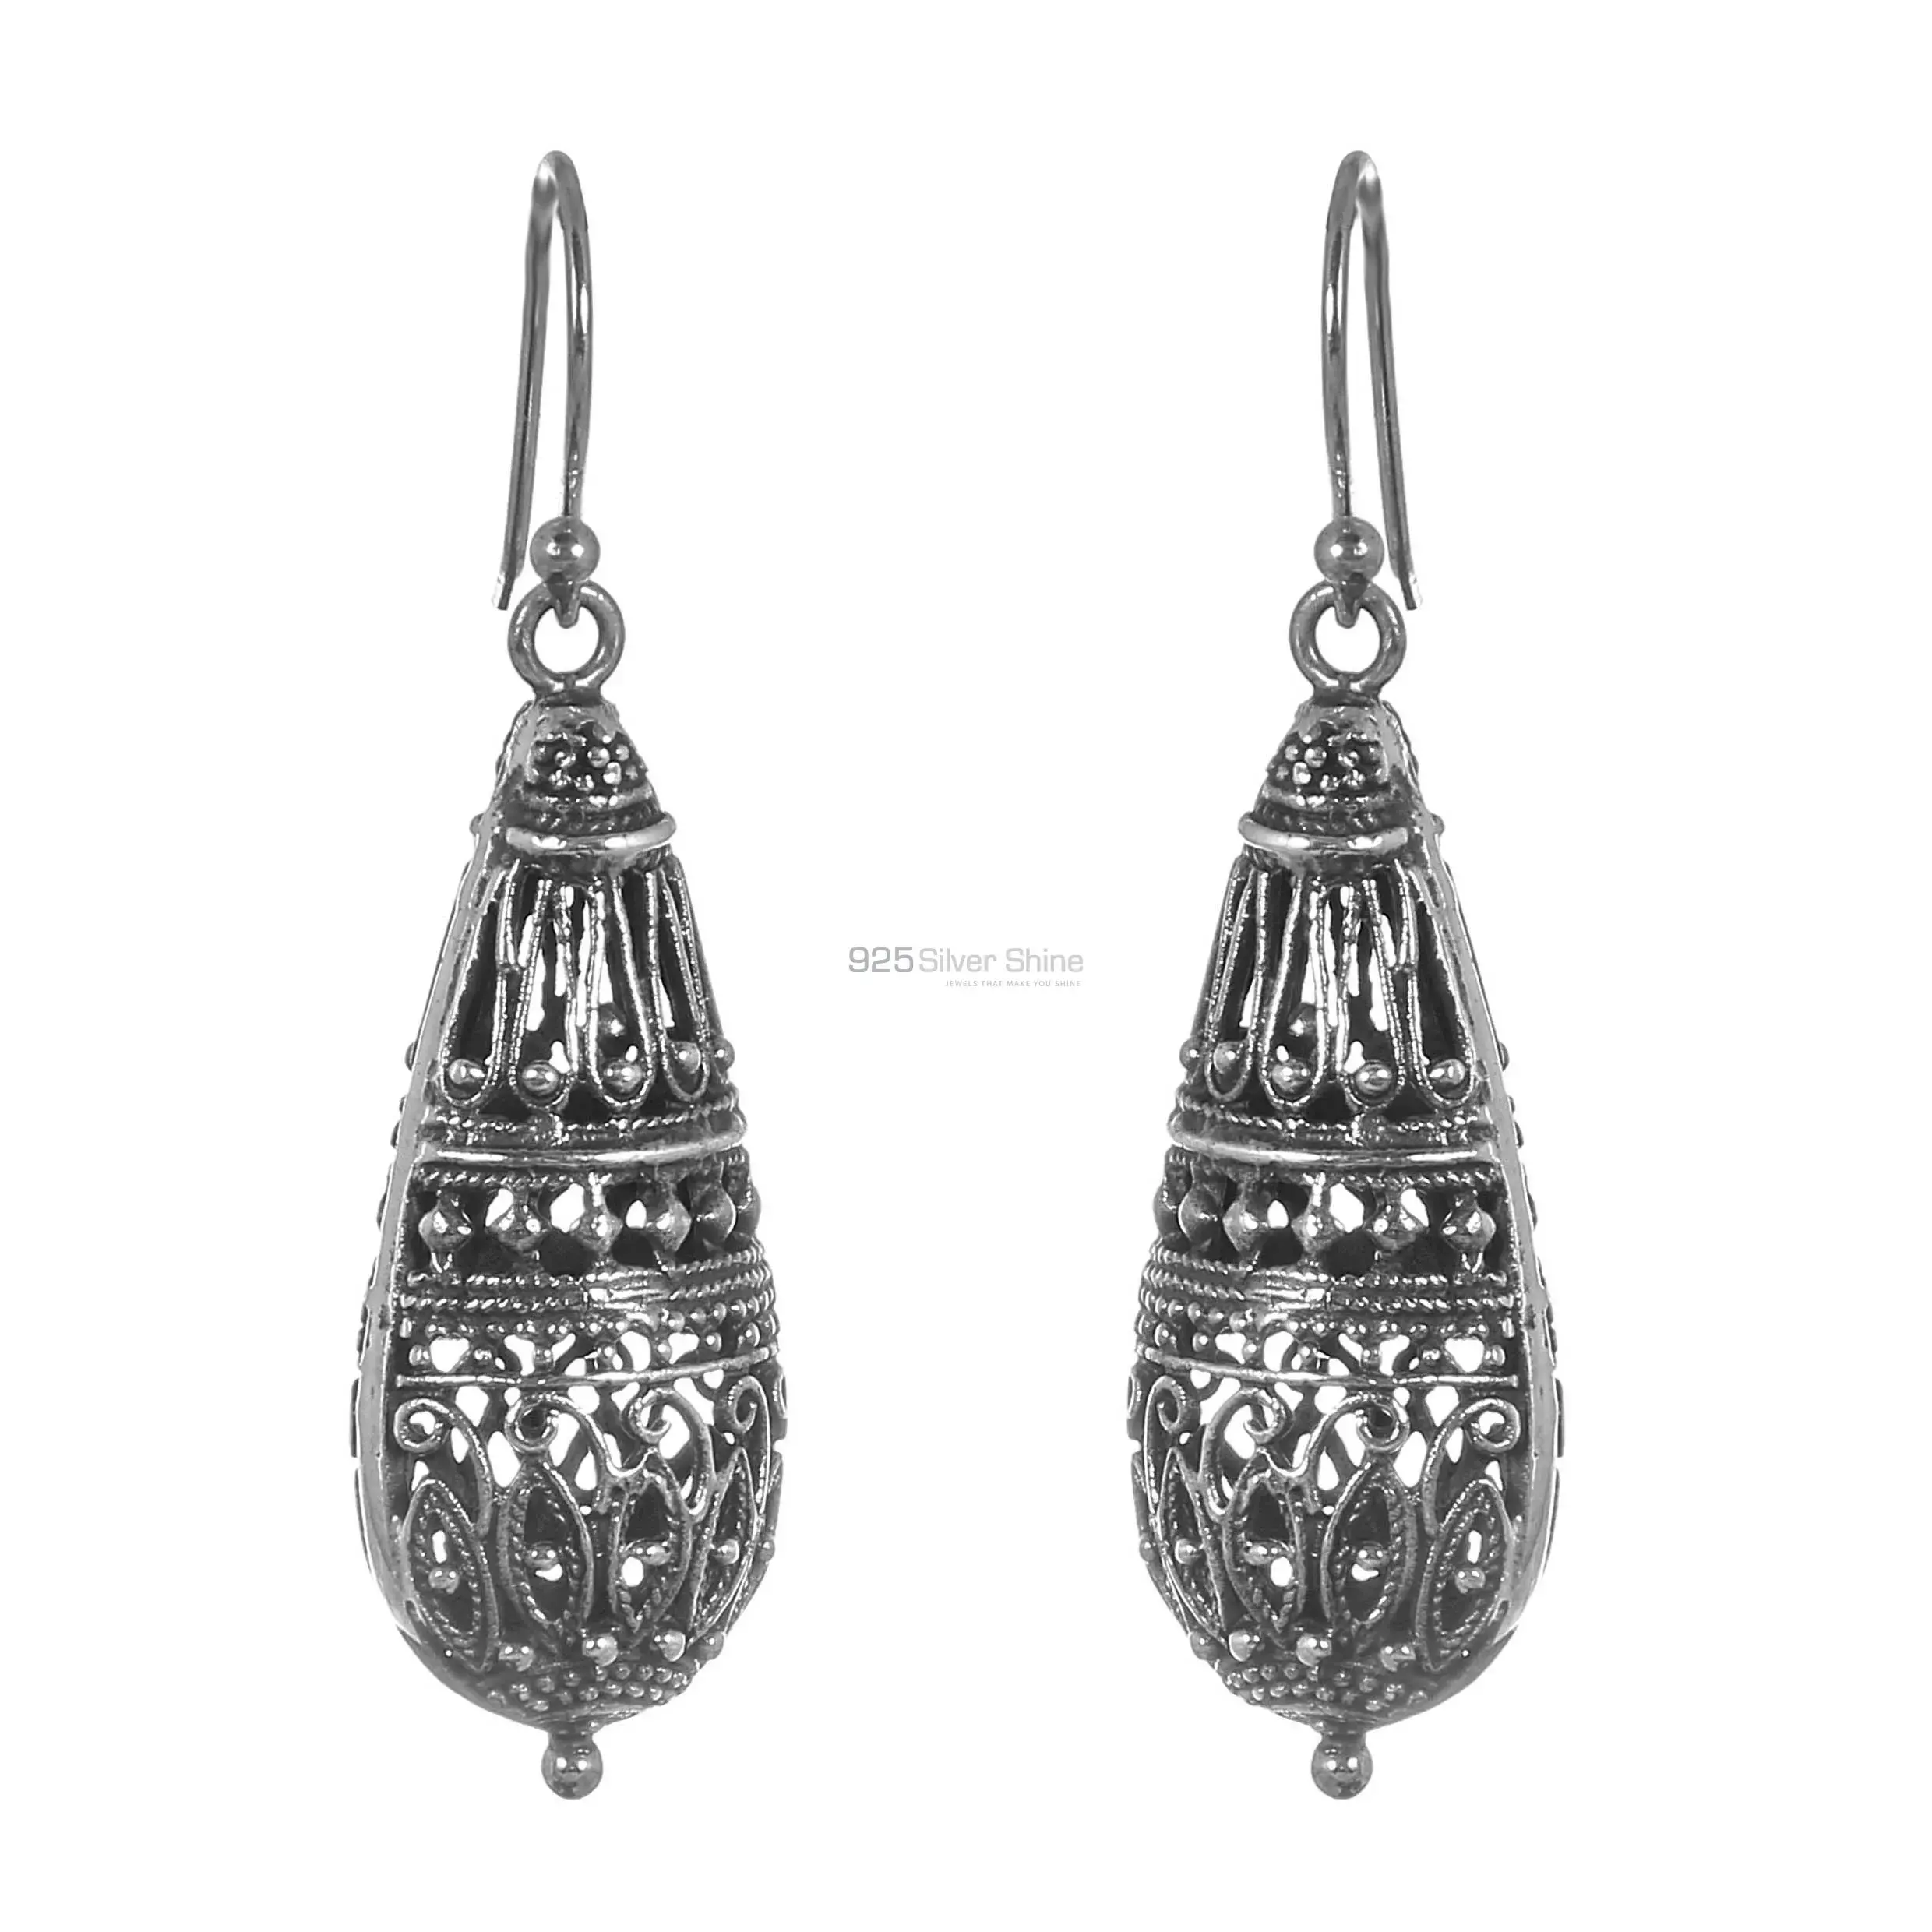 Bulk Buy Metal Circle Shaped Hanging Earrings - Wholesale Handmade  Dangle/Drop Earrings with Silver Finish from Wholesalers in India